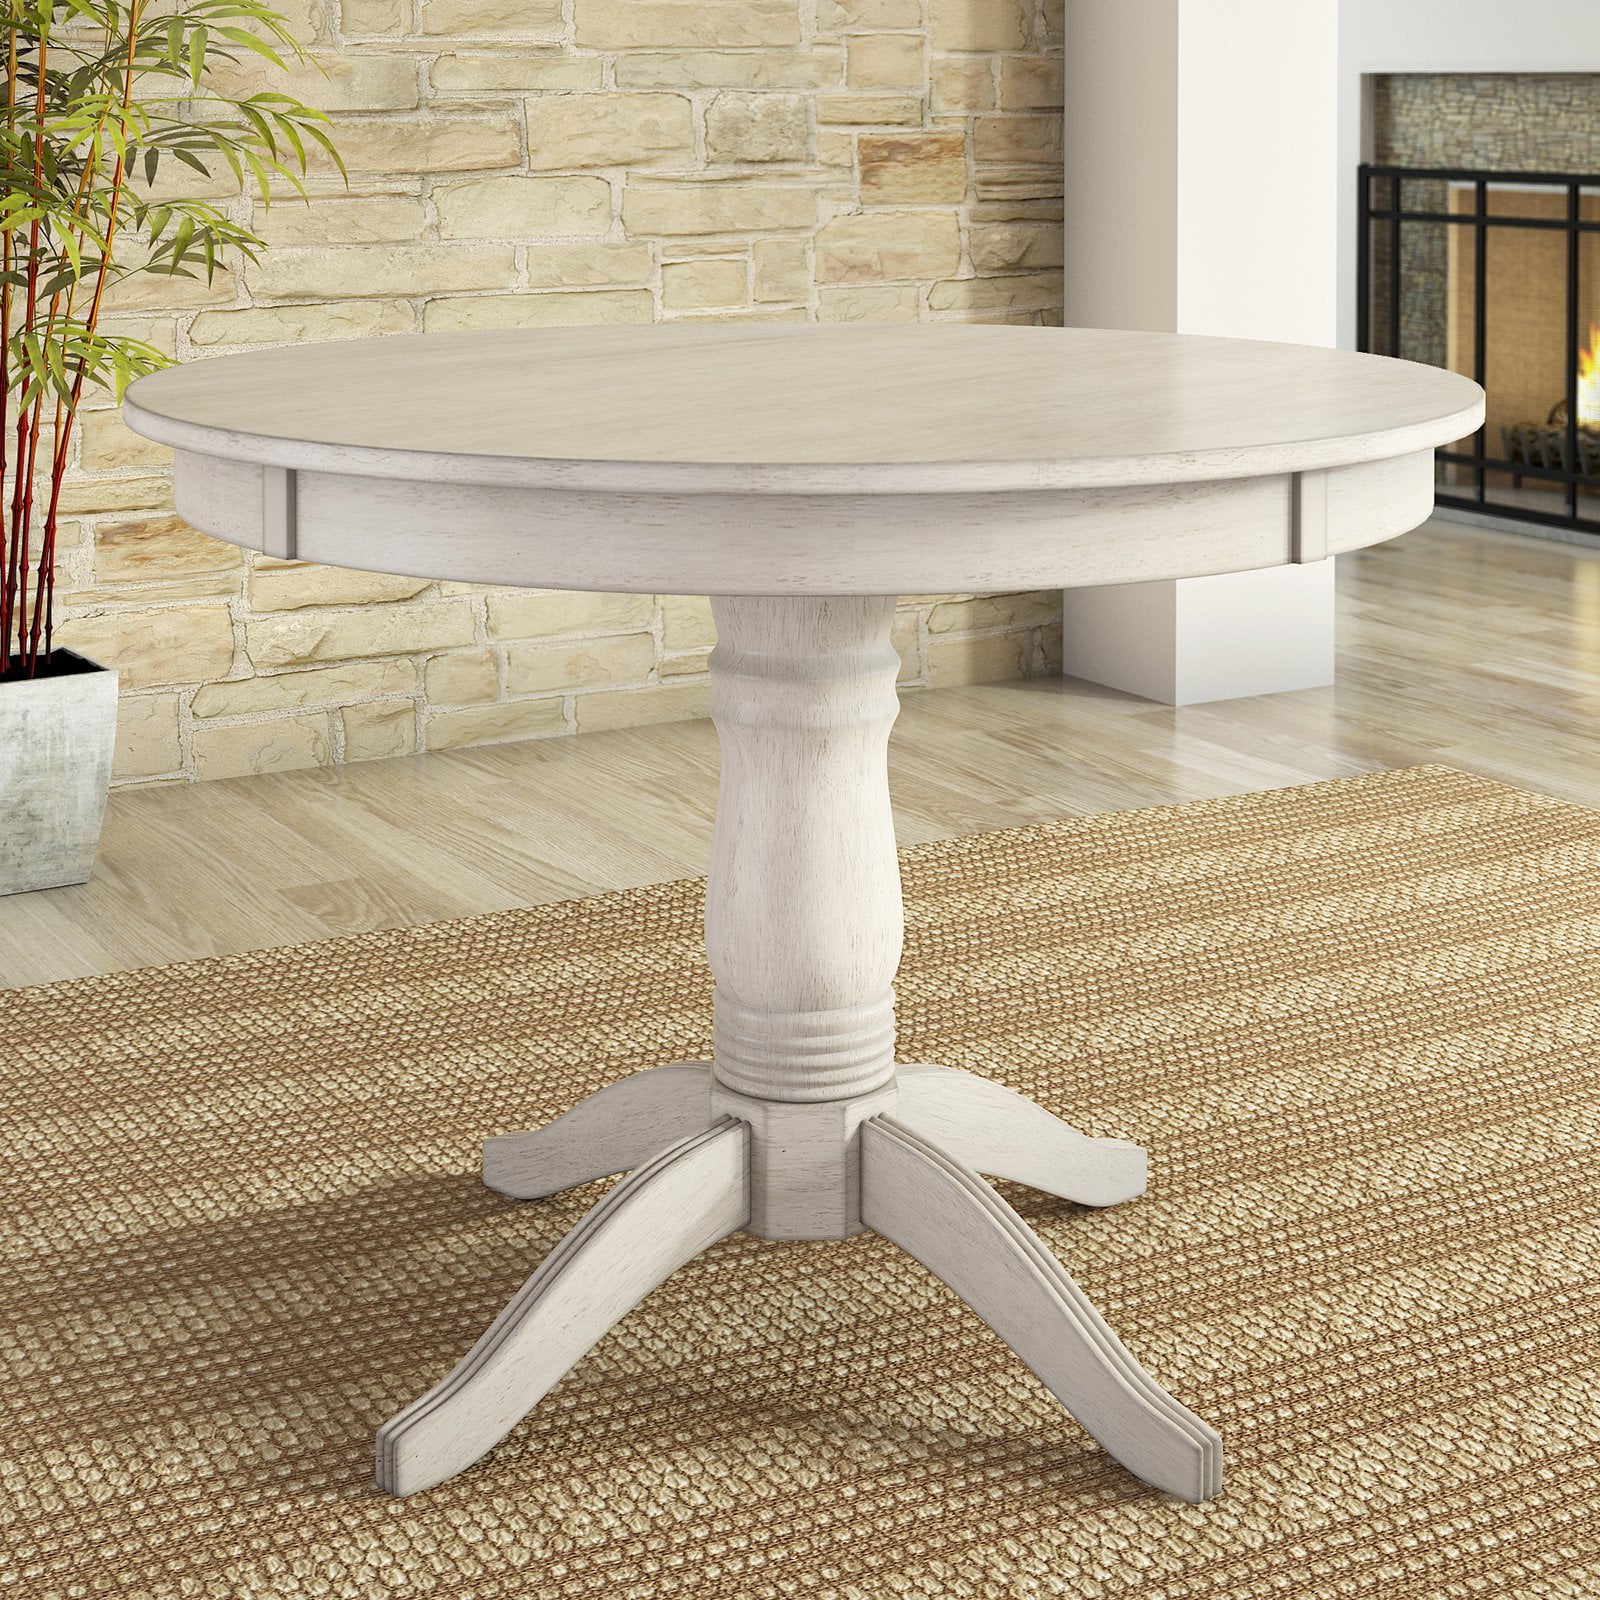 Lexington 42 Round Wood Pedestal Base, Off White Distressed Round Dining Table